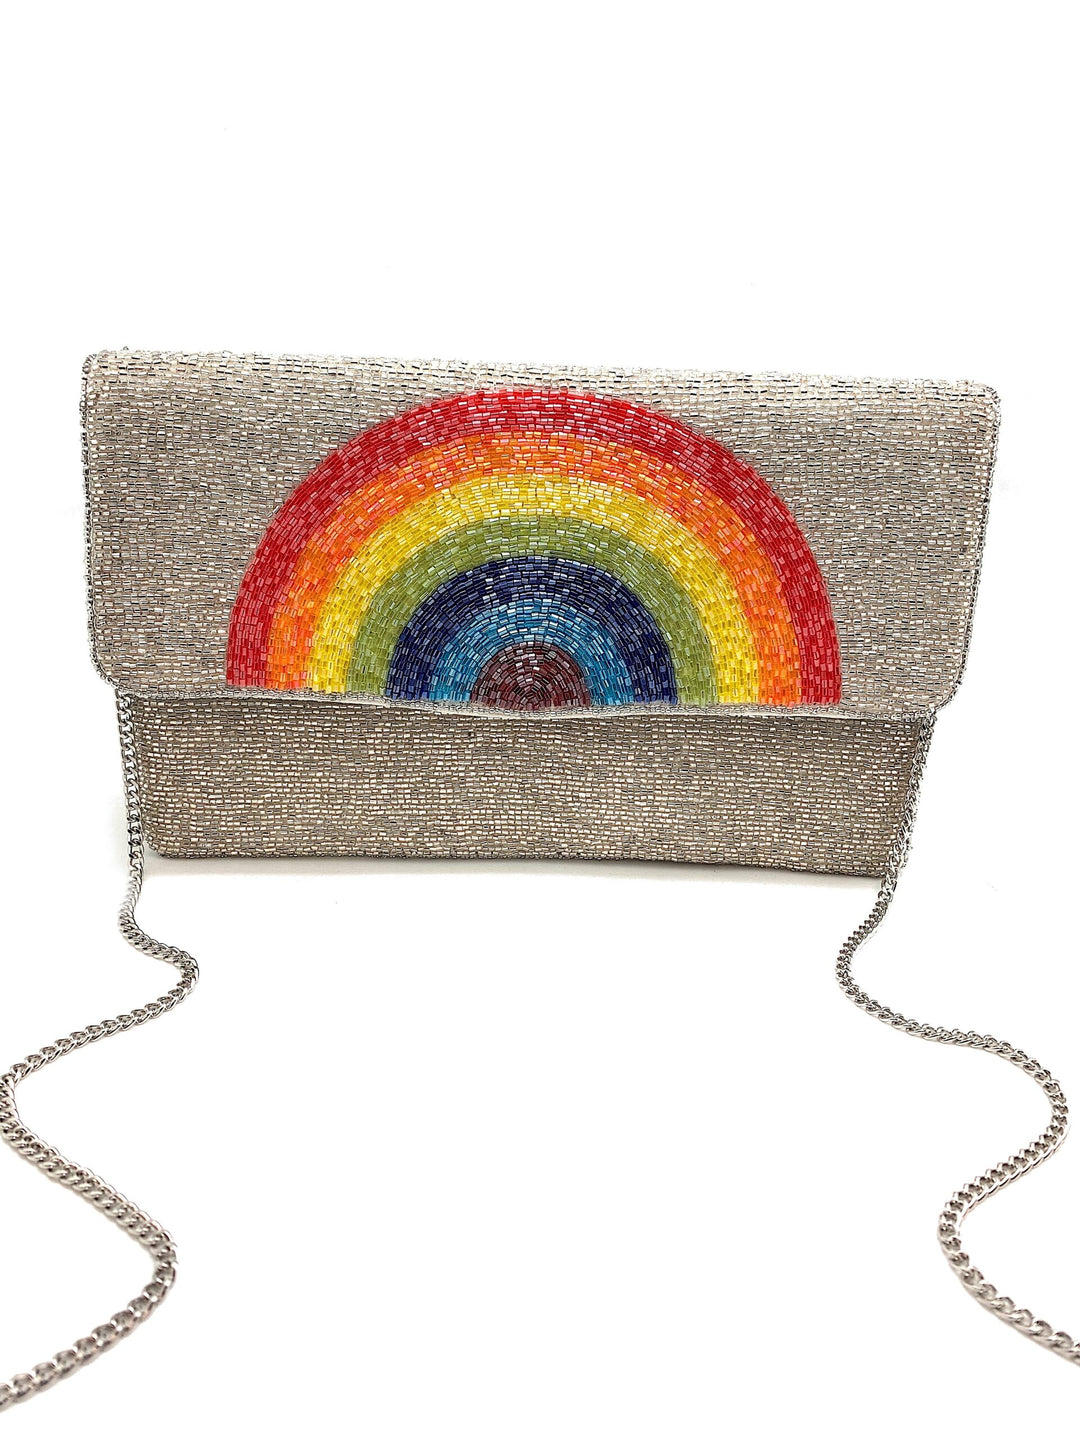 SILVER RAINBOW CLUTCH - Kingfisher Road - Online Boutique